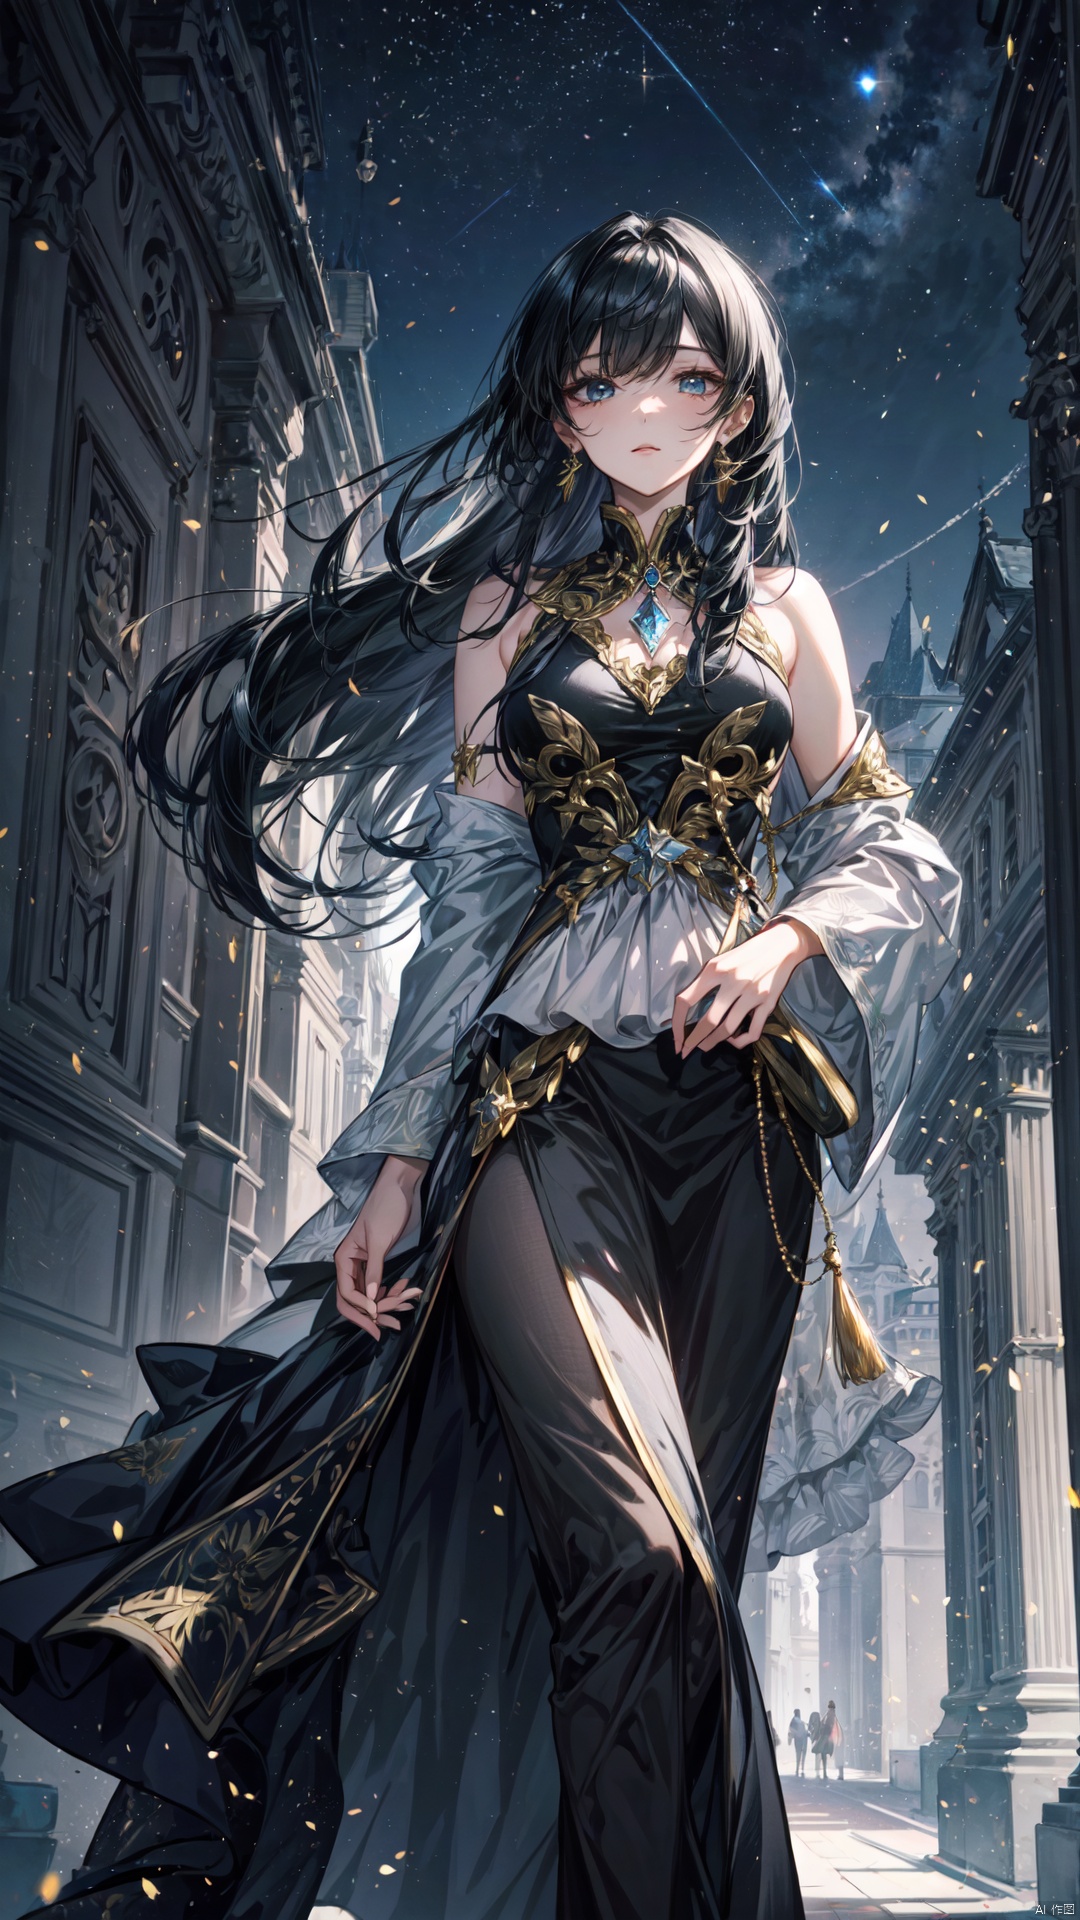 The lady's face was sweet and calm, with long black hair shimmering with silver shadows at the ends. Her long skirt, like the night sky, was adorned with exquisite silver patterns and light gold tassels. She stood there, like a noble and noble woman walking out of the palace, emitting a mysterious and lazy aura